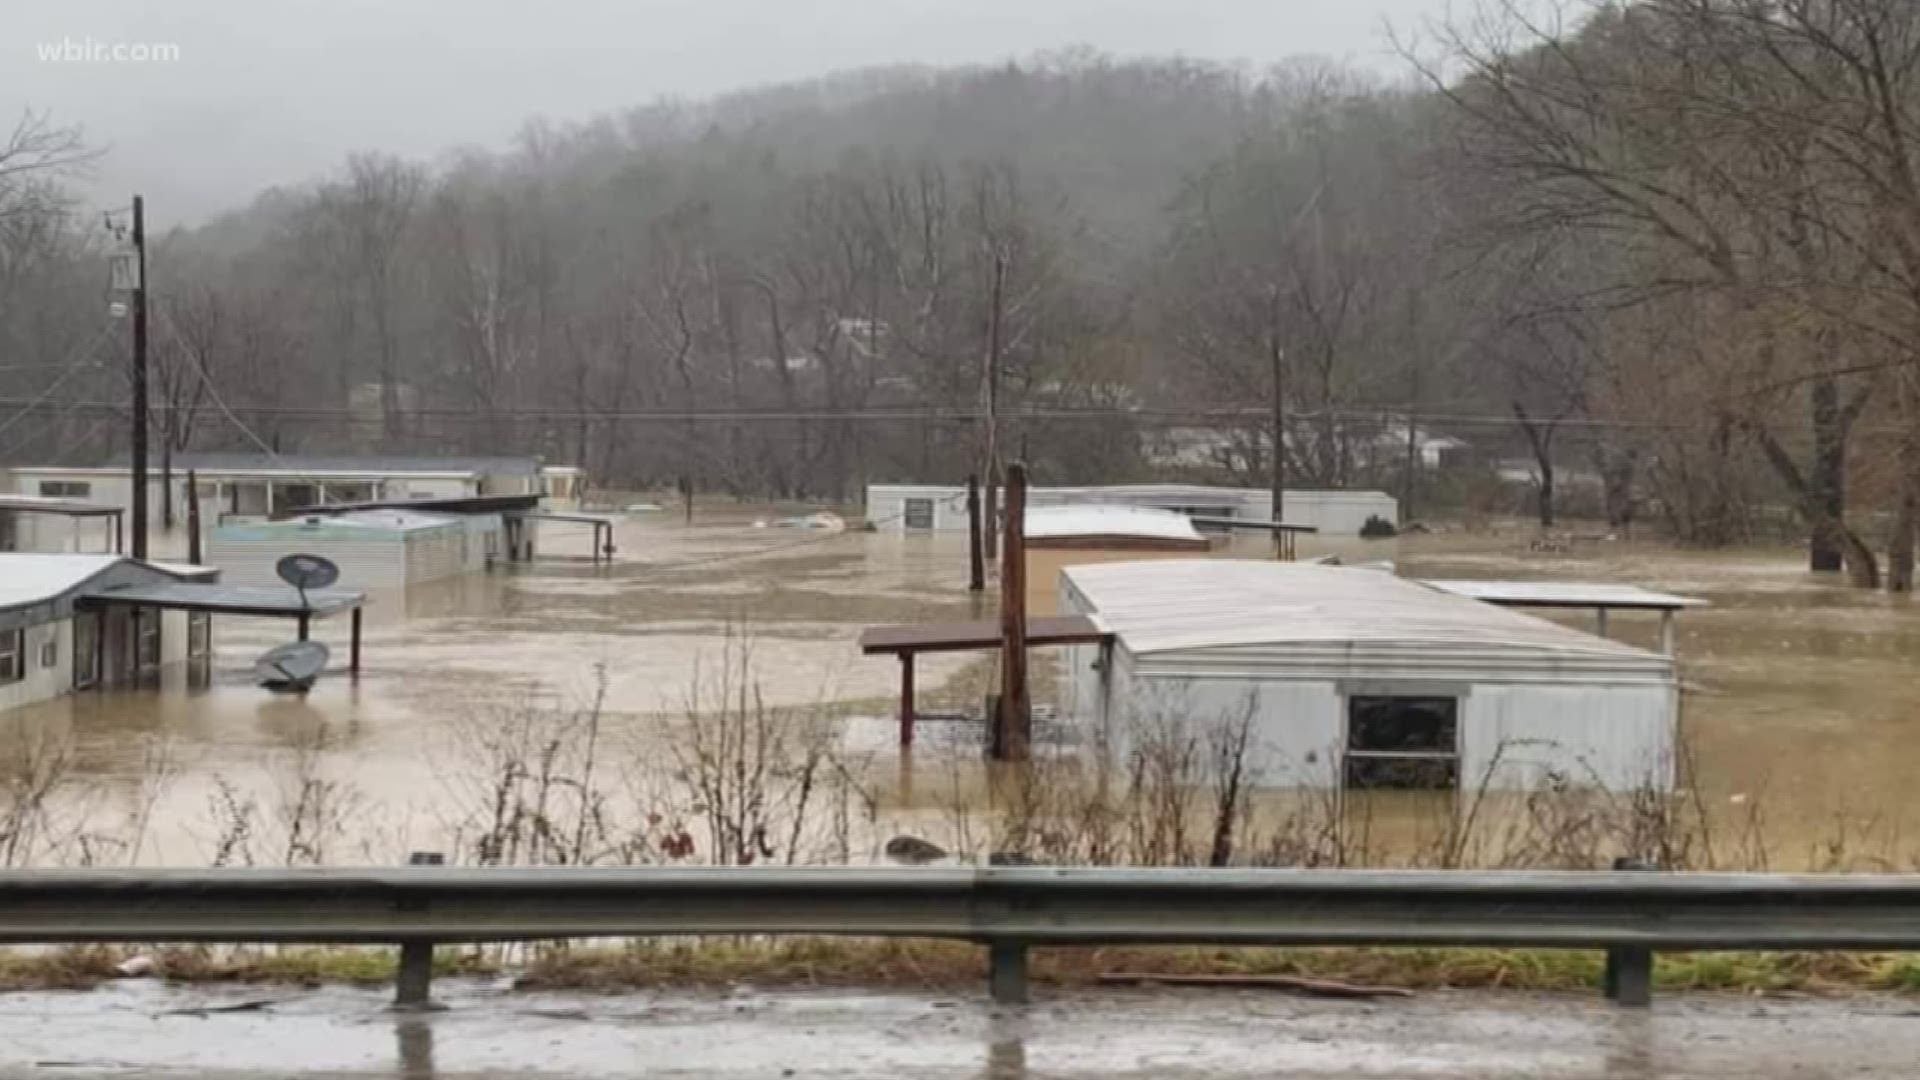 The Kentucky governor has declared a state of emergency for several counties in the eastern Kentucky. That includes several on the Tennessee state line.